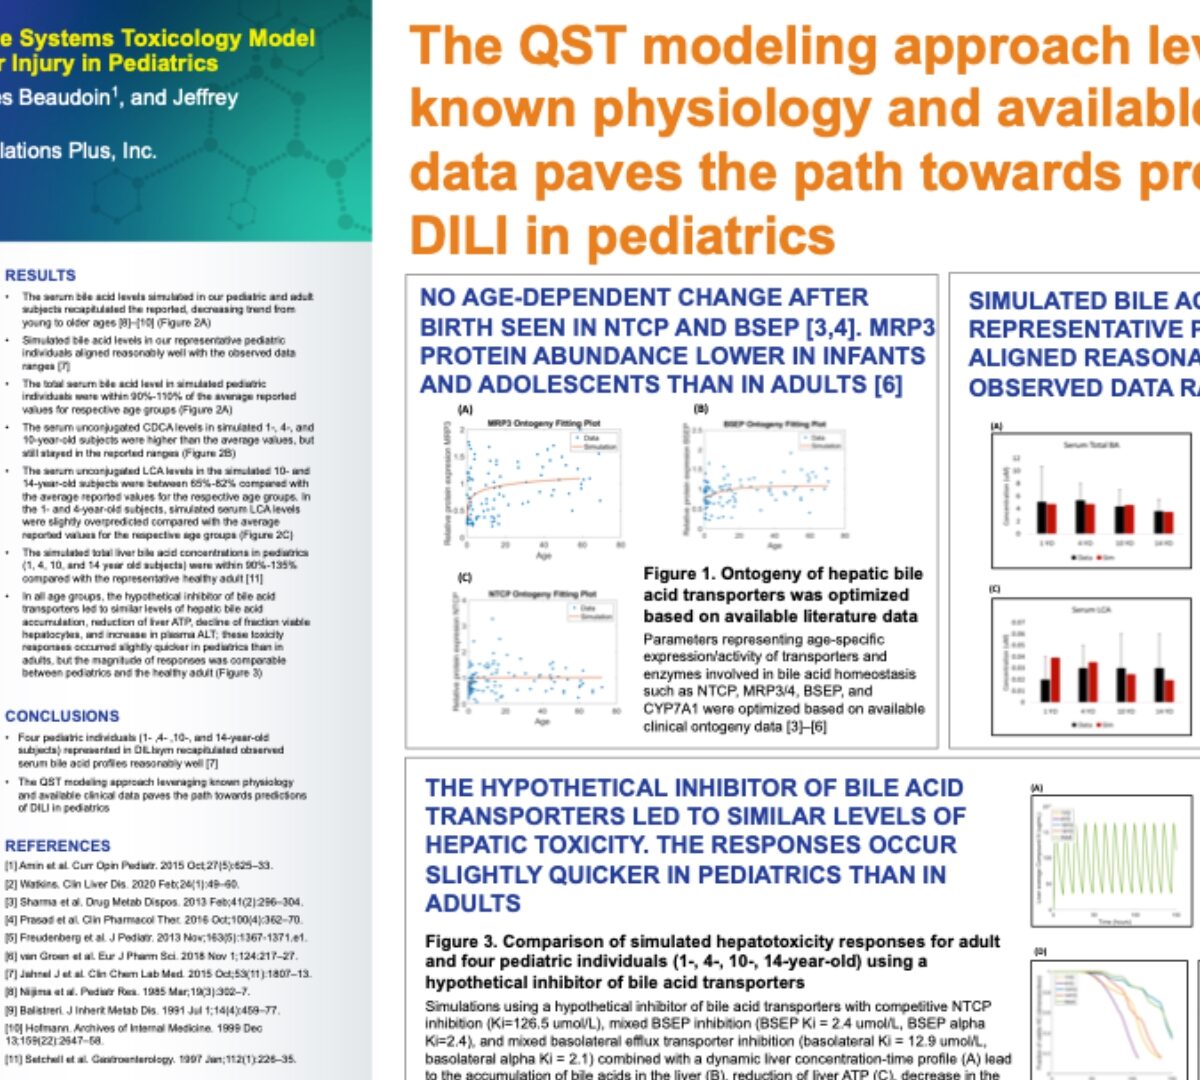 The QST modeling approach leveraging known physiology and available clinical data paves the path towards predictions of DILI in pediatrics